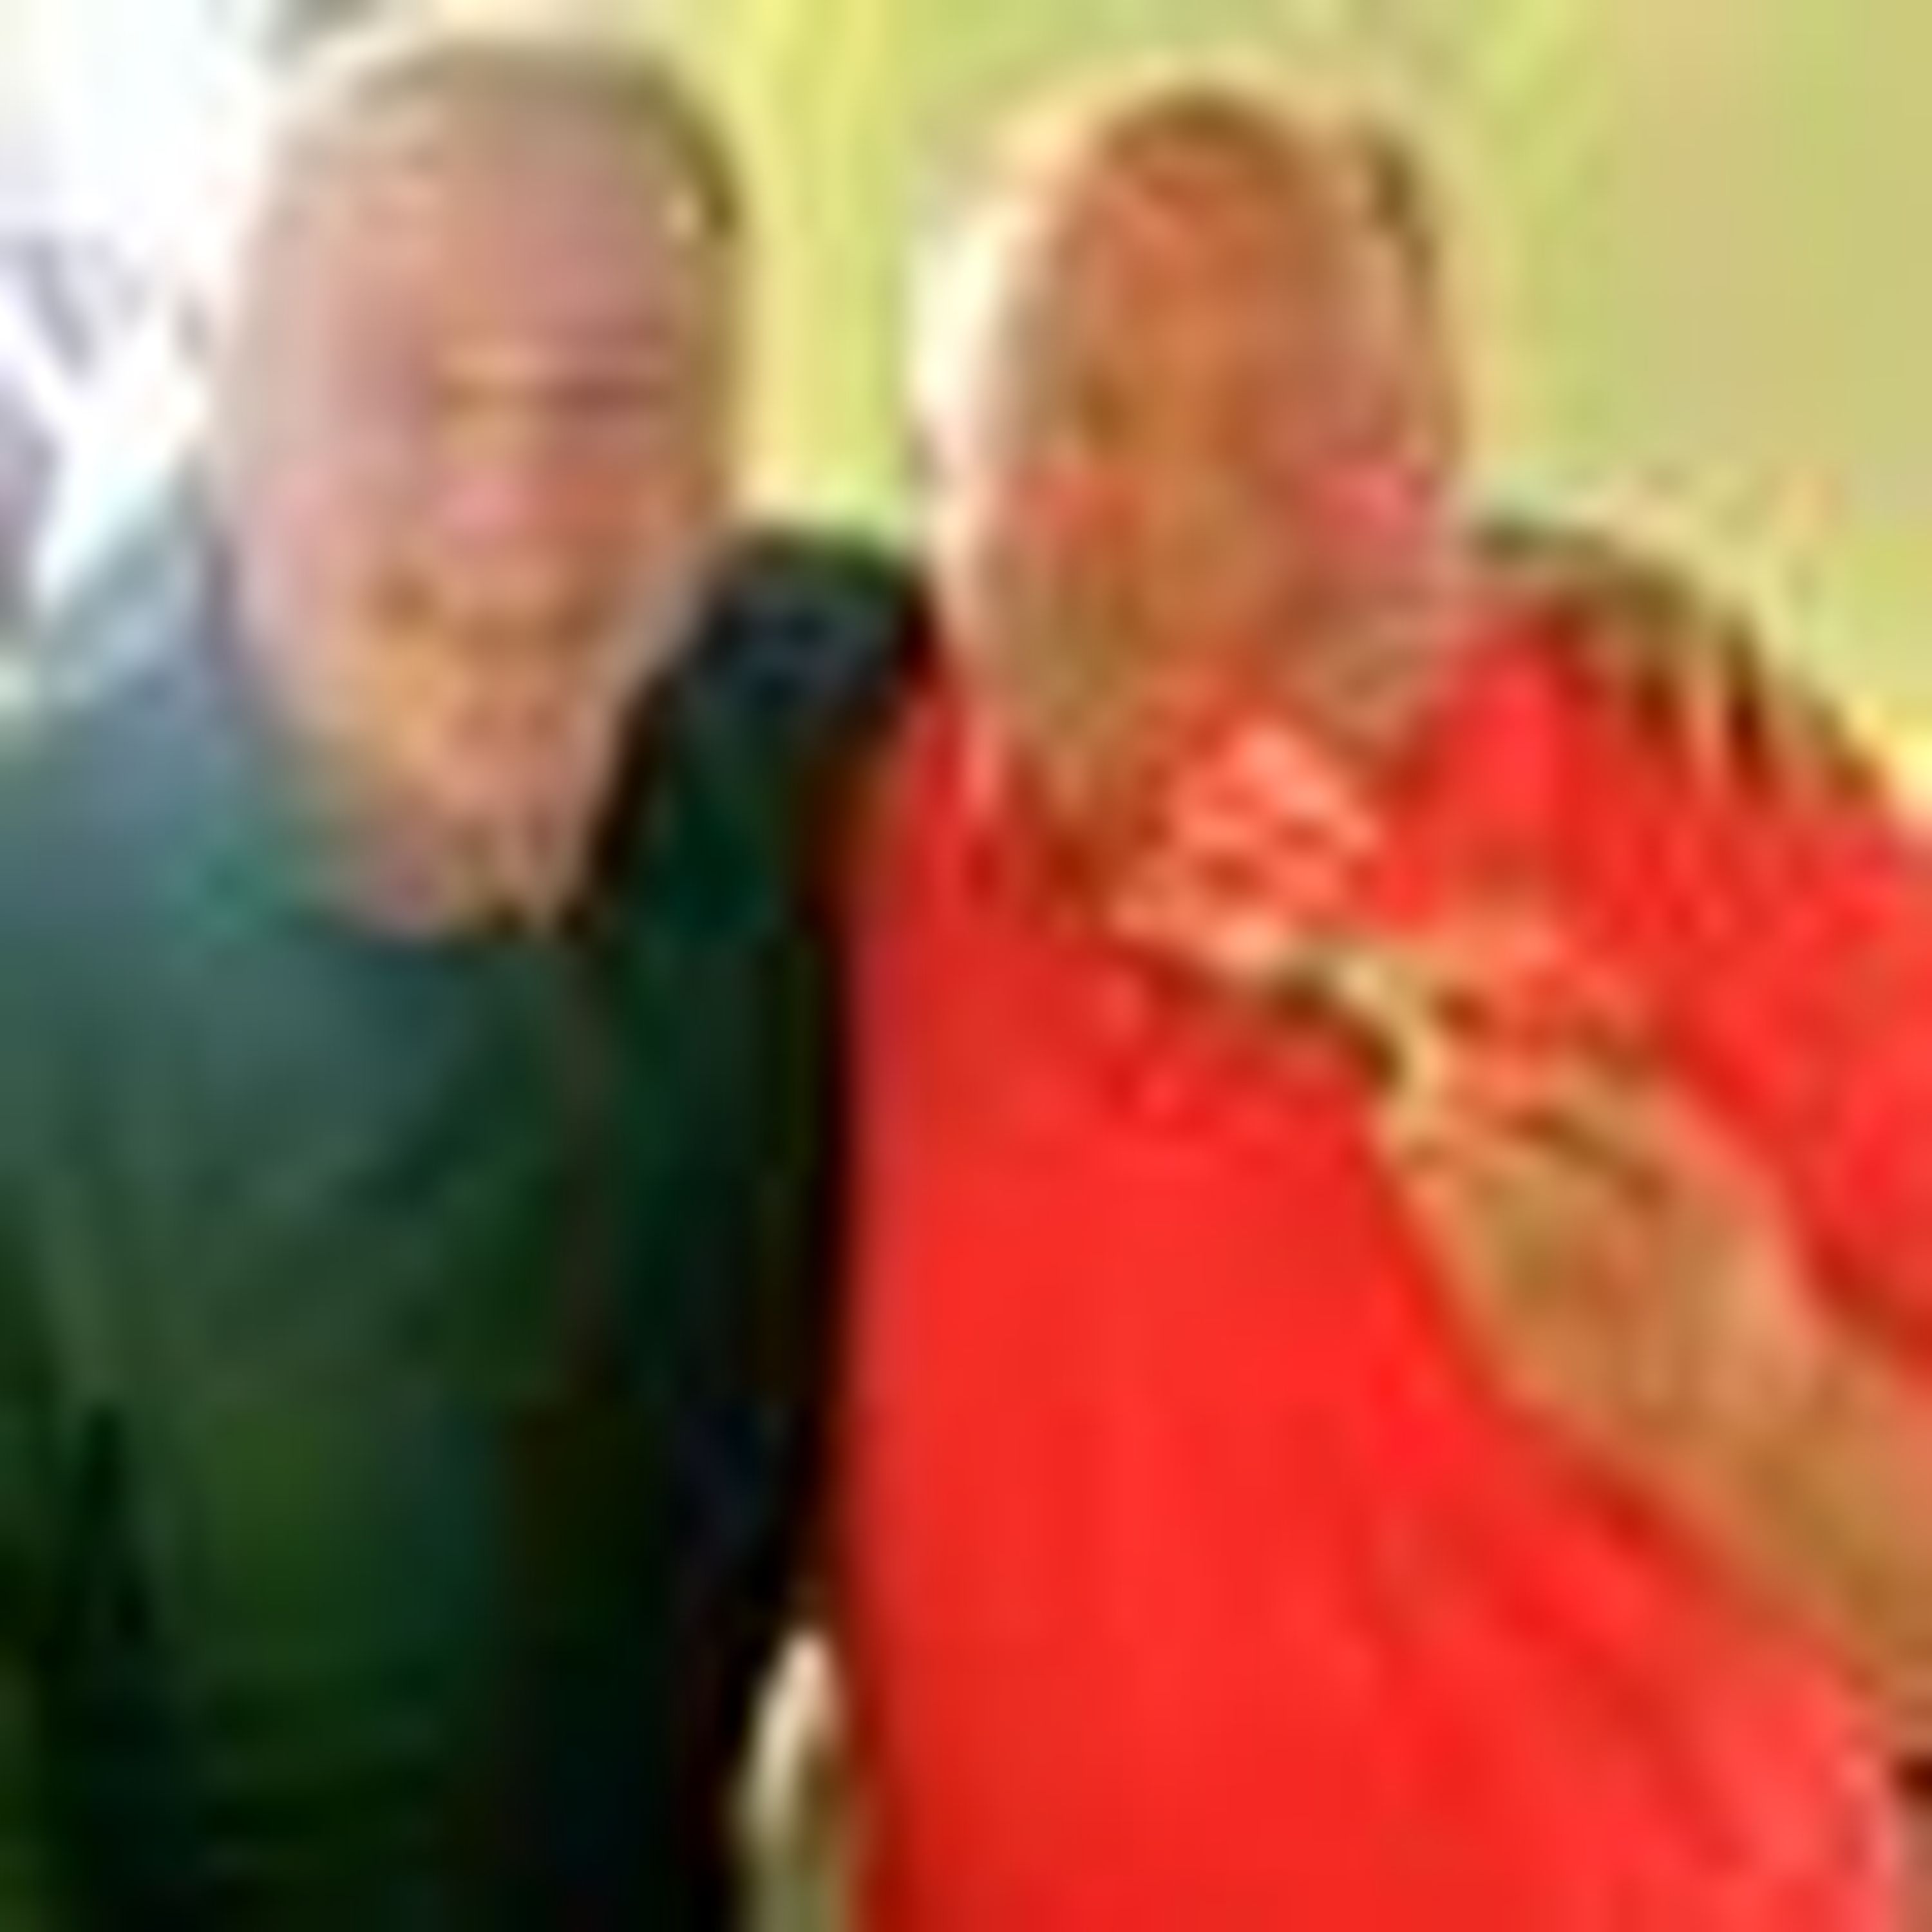 Alan Brazil breakfast bite - Friday, September 1: Can Ally McCoist guess the mystery guest?